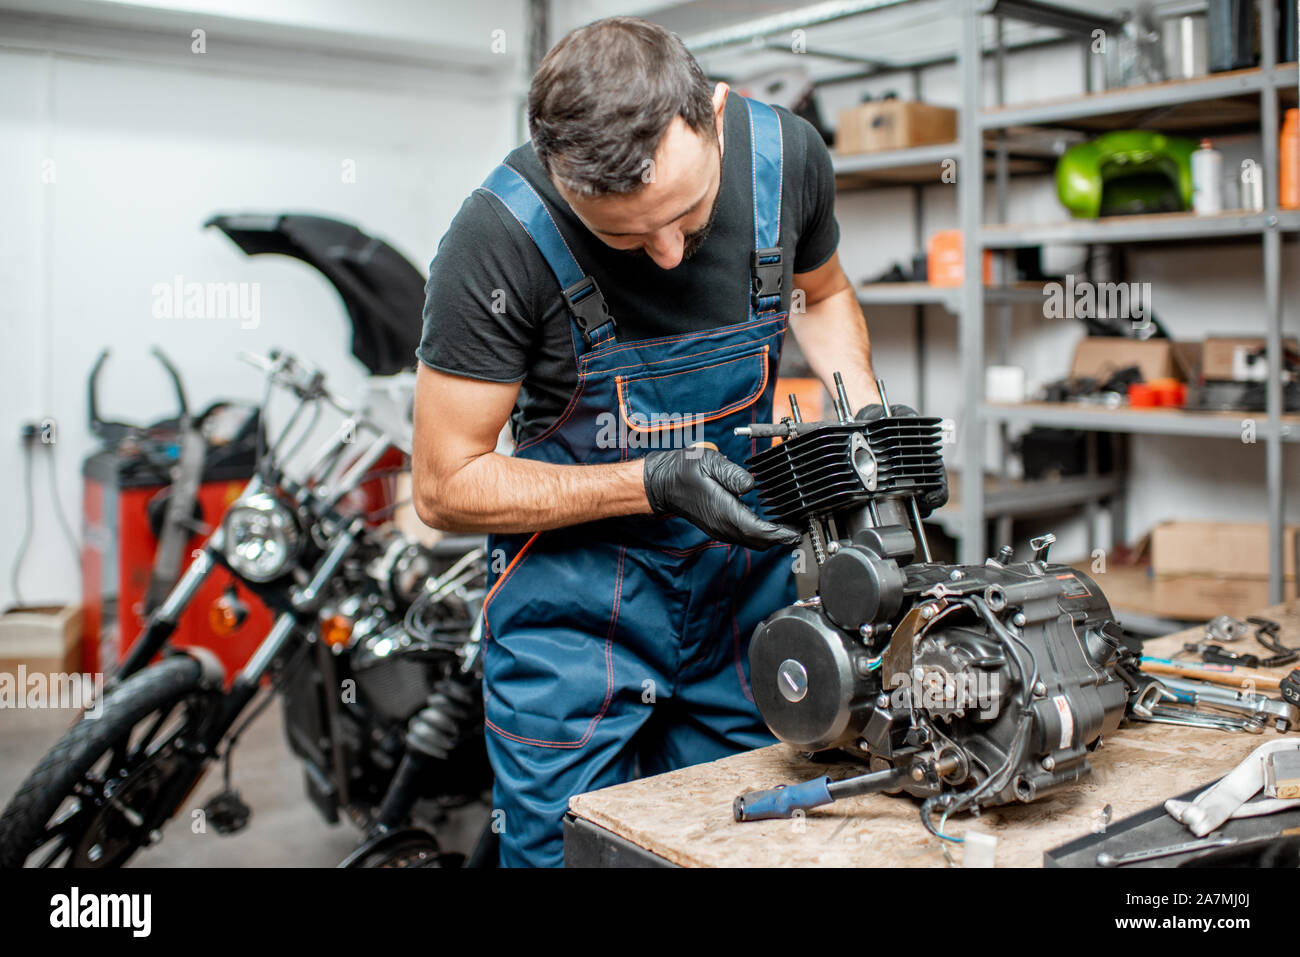 Workman in overalls disassembling motorcycle engine during a repairment at  the working table of the workshop Stock Photo - Alamy